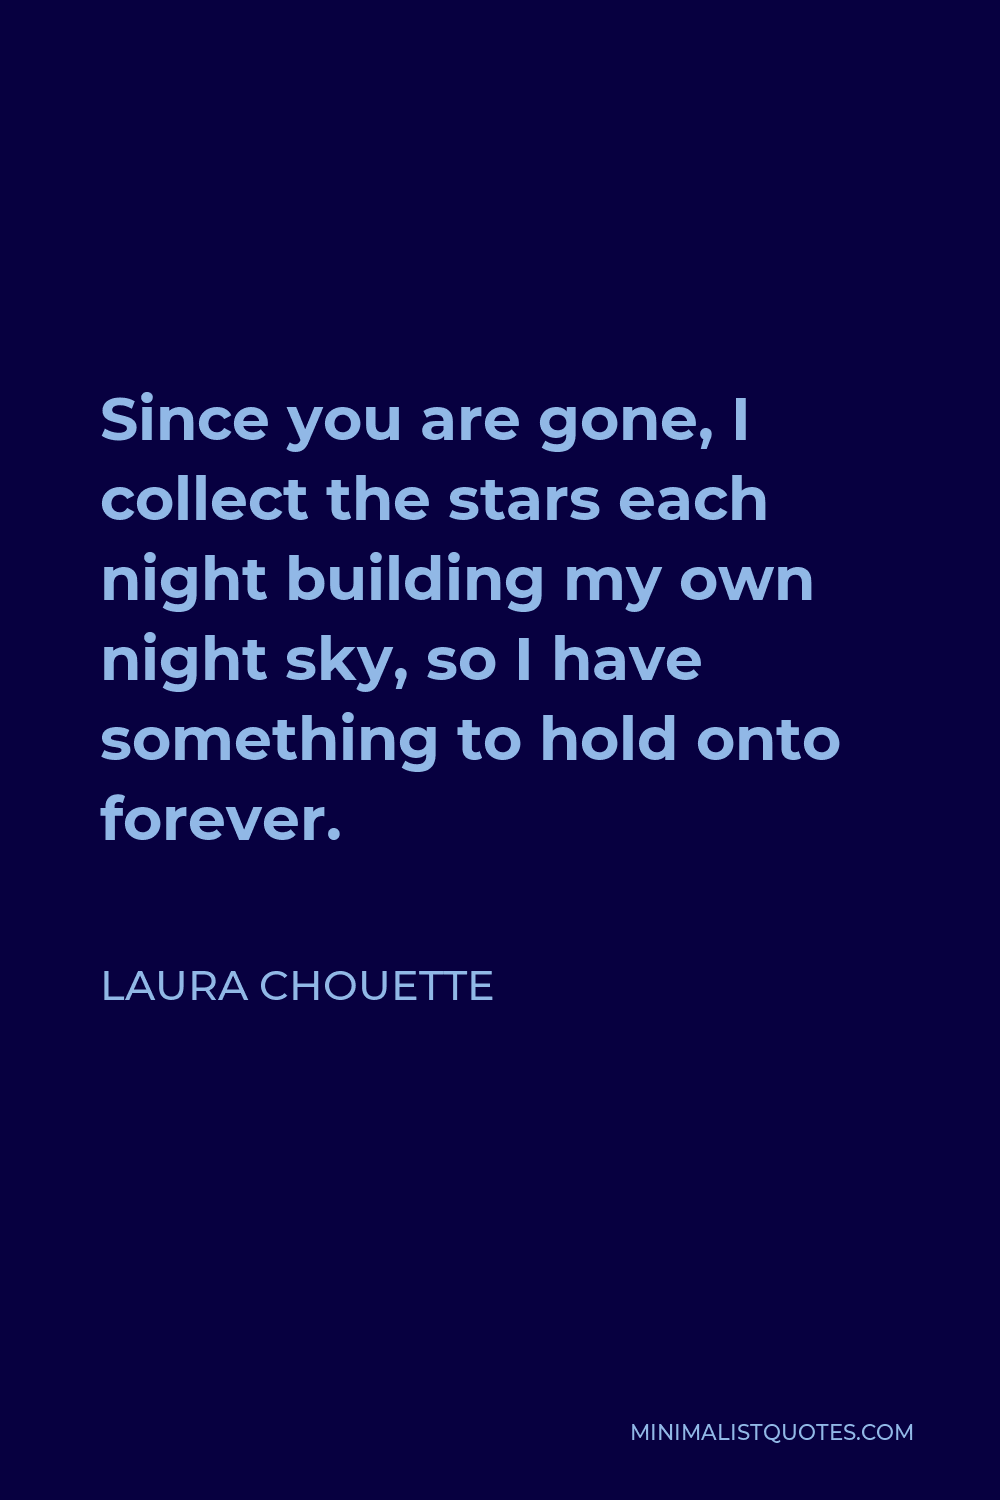 Laura Chouette Quote - Since you are gone, I collect the stars each night building my own night sky, so I have something to hold onto forever.